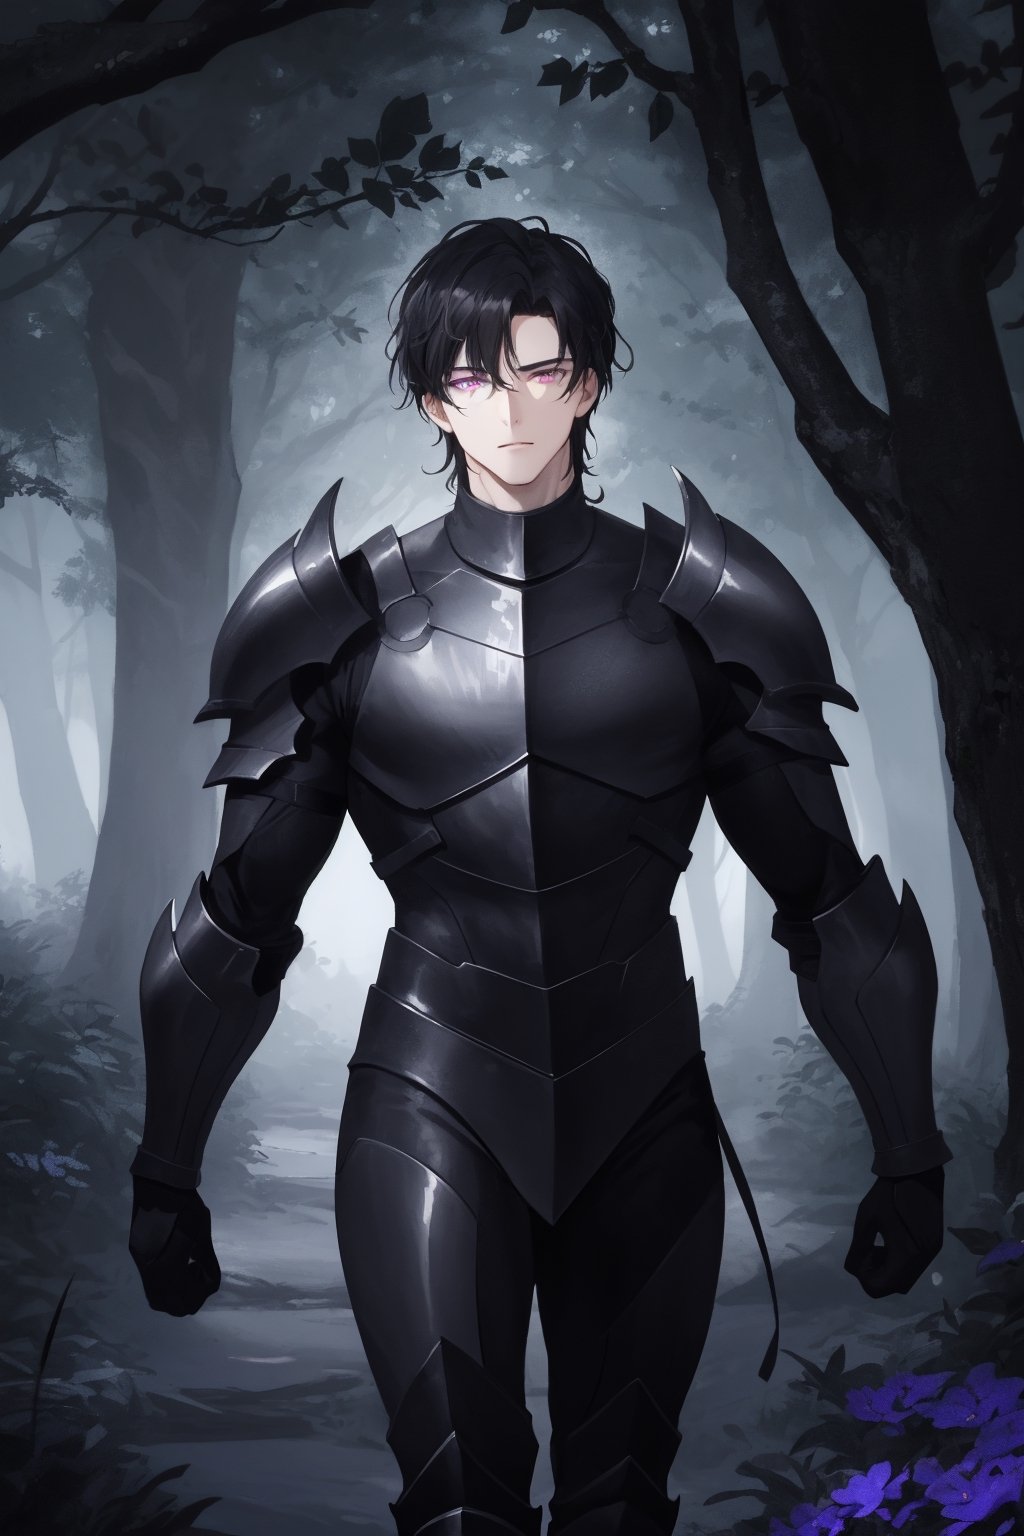 1man, young man,  25 years old,  short black hair,wavy hair,  glowing violet eyes, pale skin,  walking in a magical forest,  magical forest background,  day,  day light, wearing a heavy armor,  training,  challenger face,  fitness body,  piece teacher,  perfect face,  high quality,  American shot,  perfect face,  perfect hands,  muscular sensual body,  aesthetic and sensual body, Detailedface,1boy